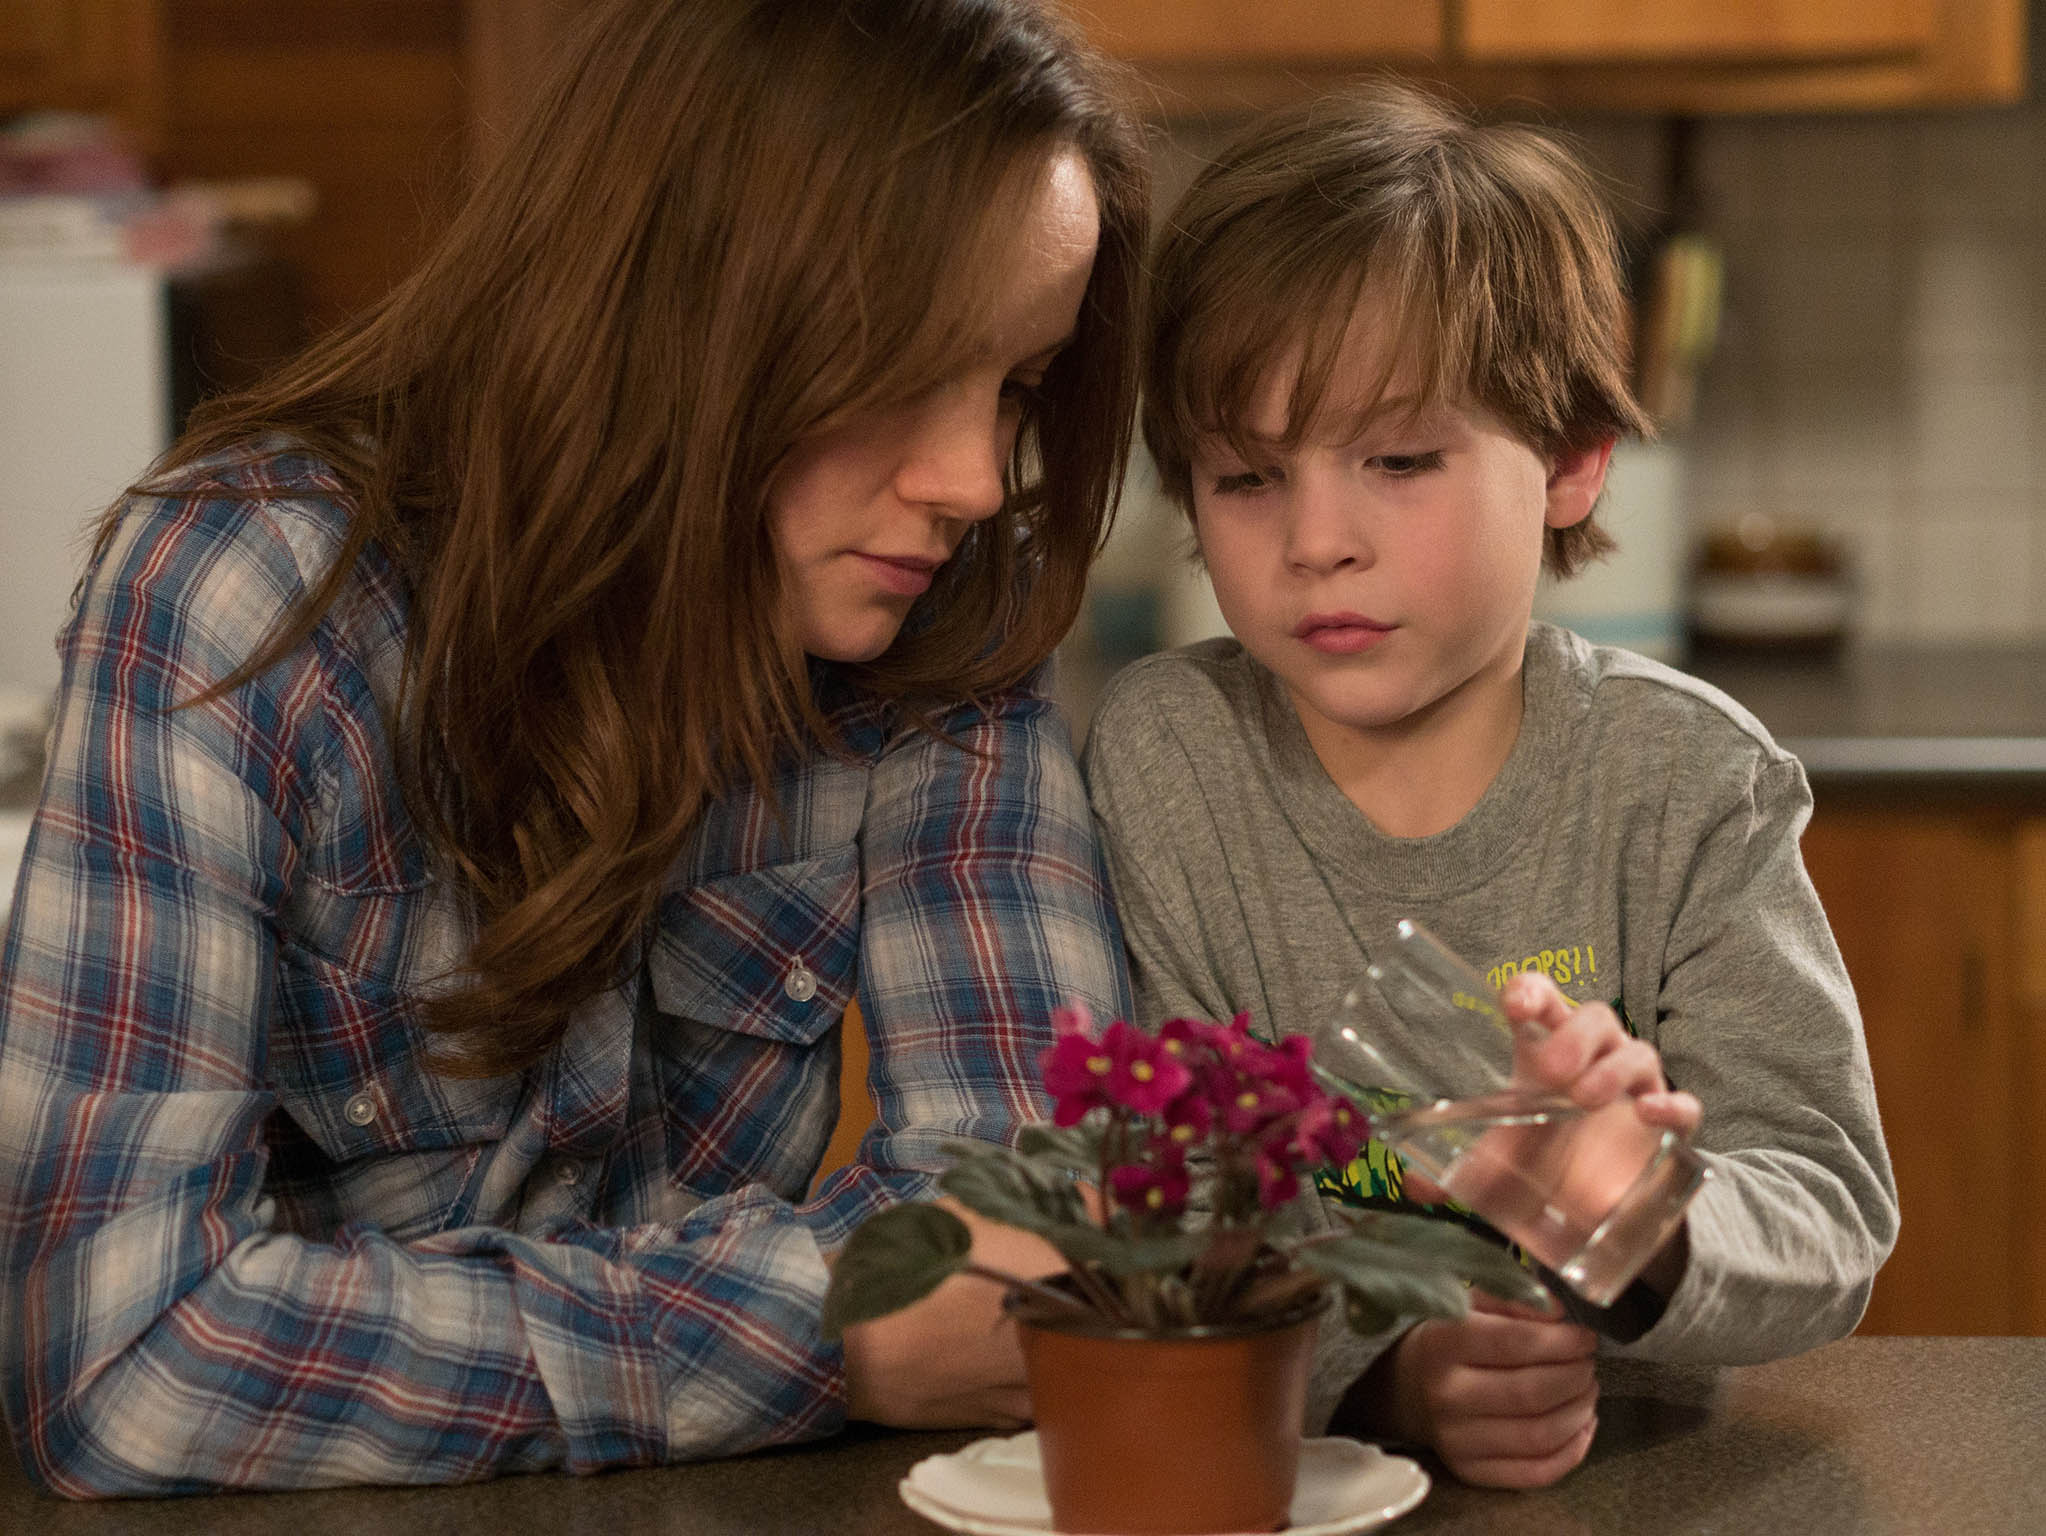 Brie Larson in 'Room', with Jacob Tremblay